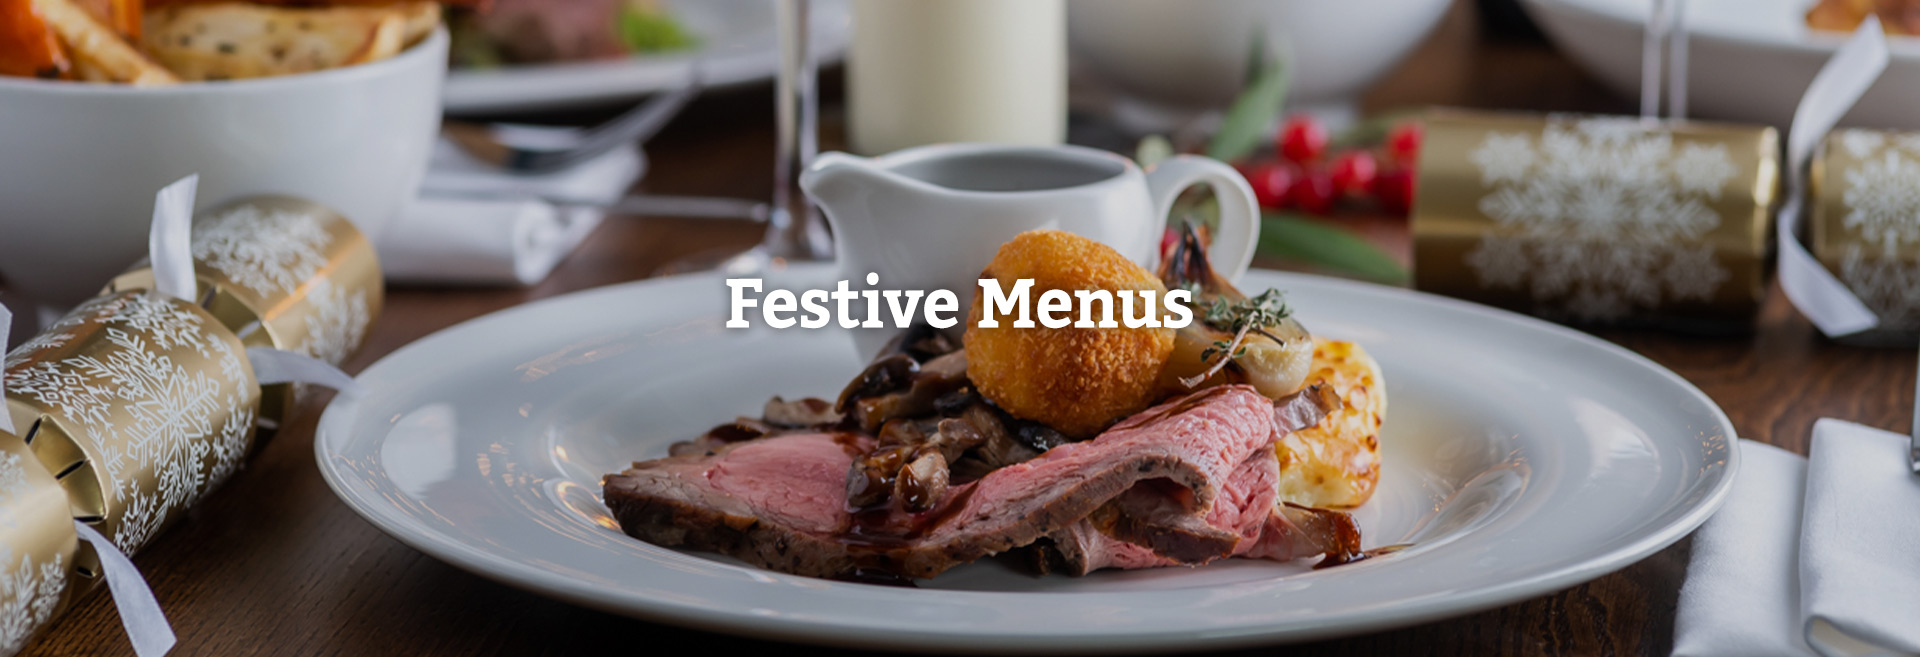 Festive Christmas Menu at The Albion Hotel 